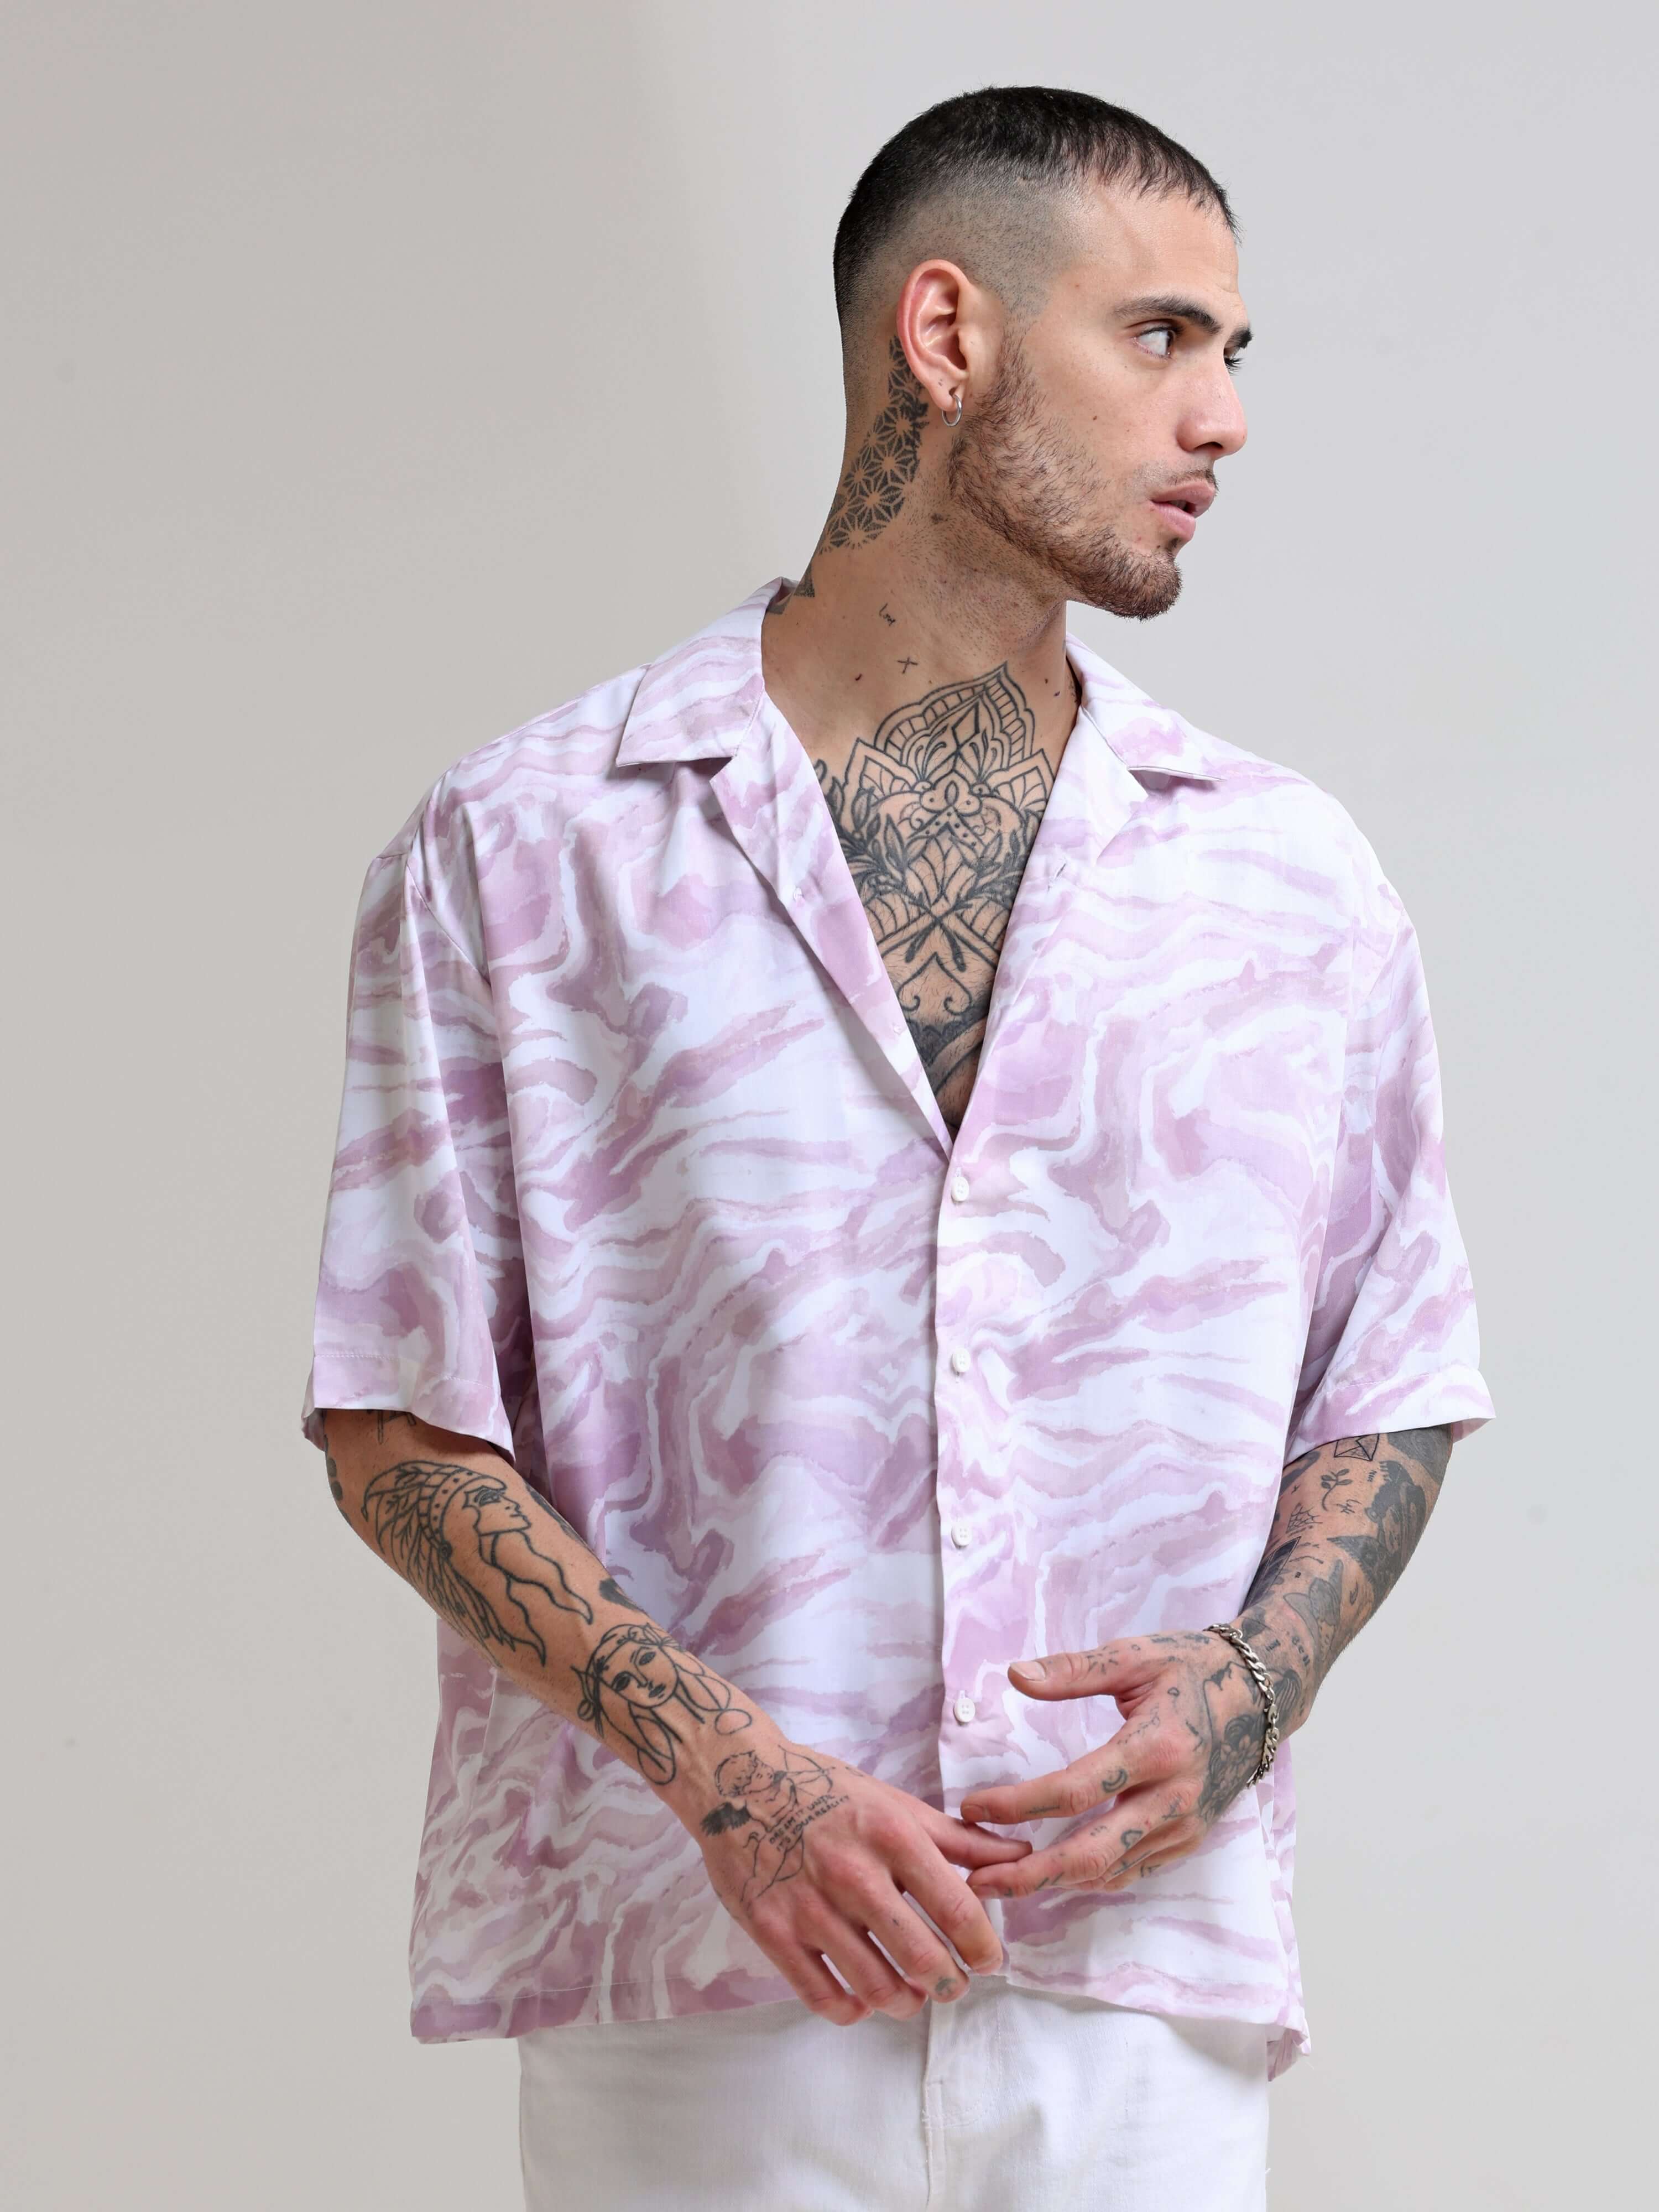 Watercolor Marble Oversized Shirt shop online at Estilocus. Our Watercolor Marble Oversized Shirt is perfect for those Hawaiian days. The relaxed fit and lightweight fabric make it comfortable to wear all day. Its classic style is perfect for those summer